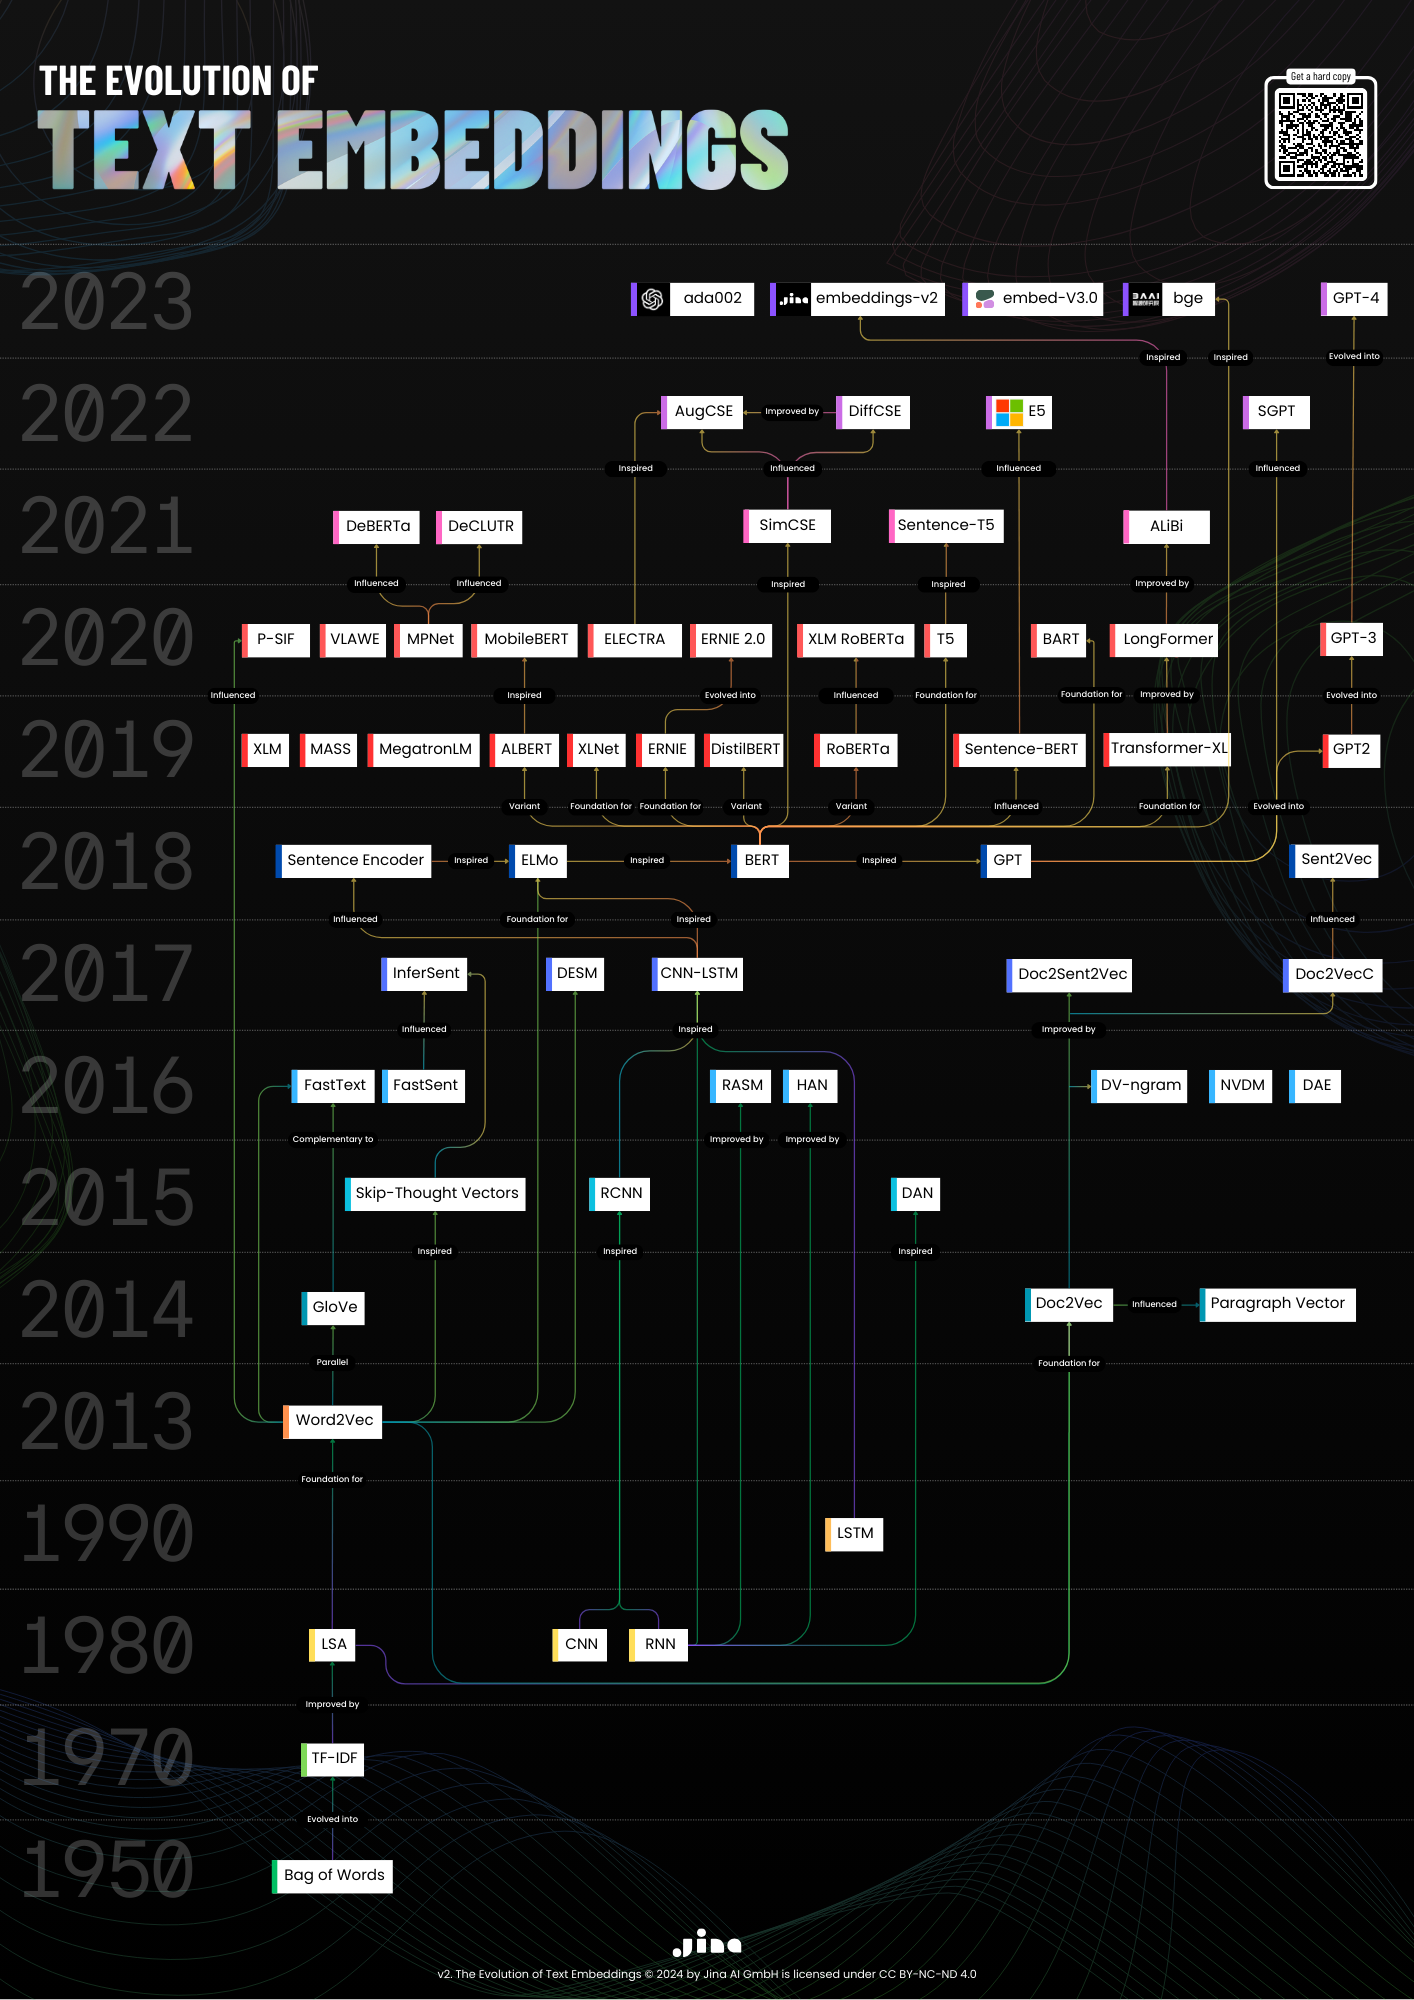 Infographic depicting the progression of text embedding models from 1950 to 2023 titled "The Evolution of Text Embeddings.